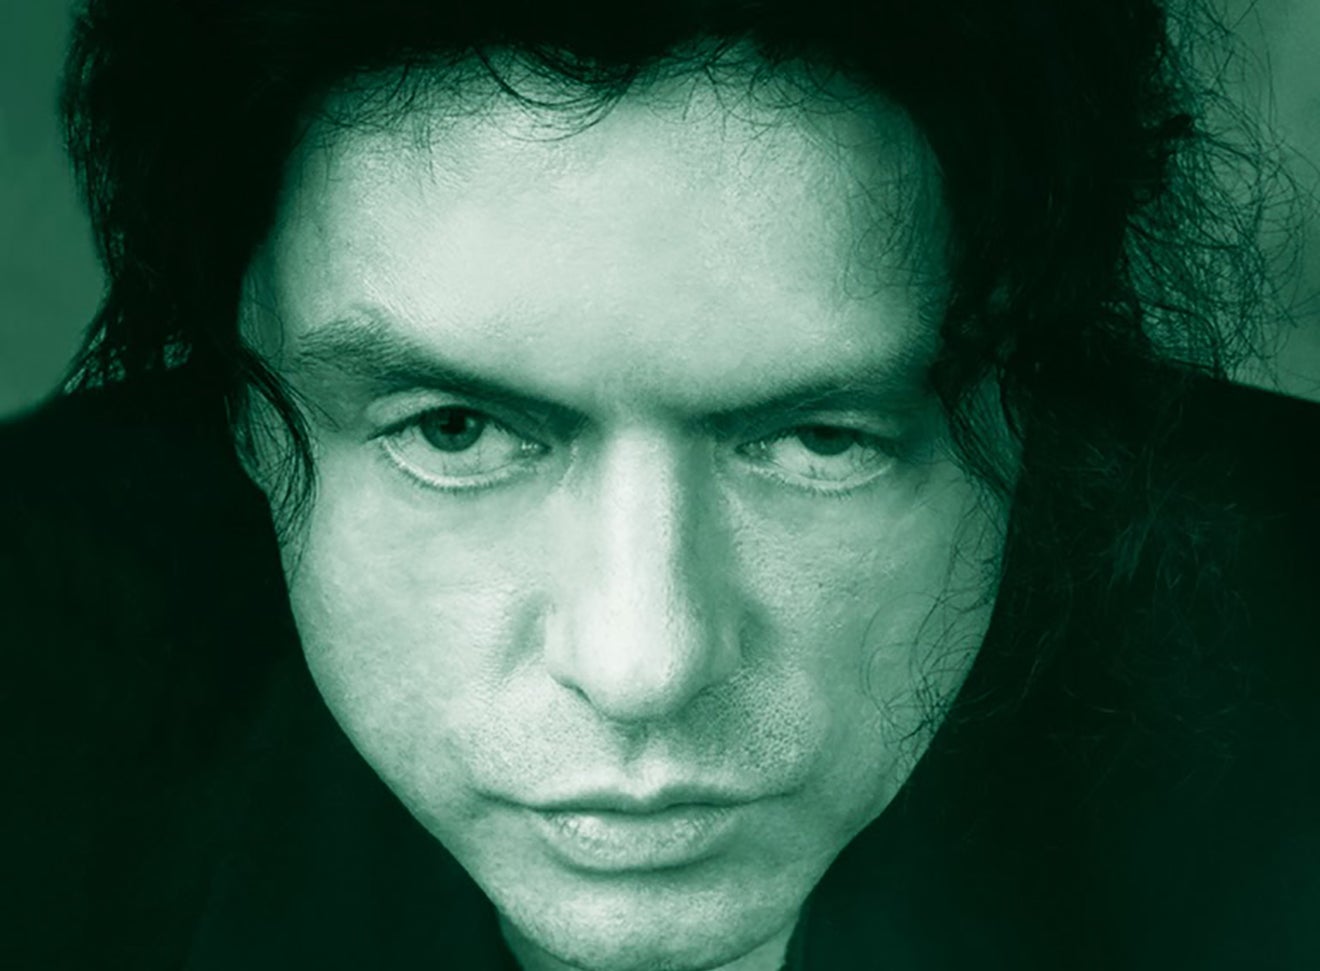 Movie poster of &quot;The Room&quot; featuring Tommy Wiseau with intense expression. Text includes cast and release info